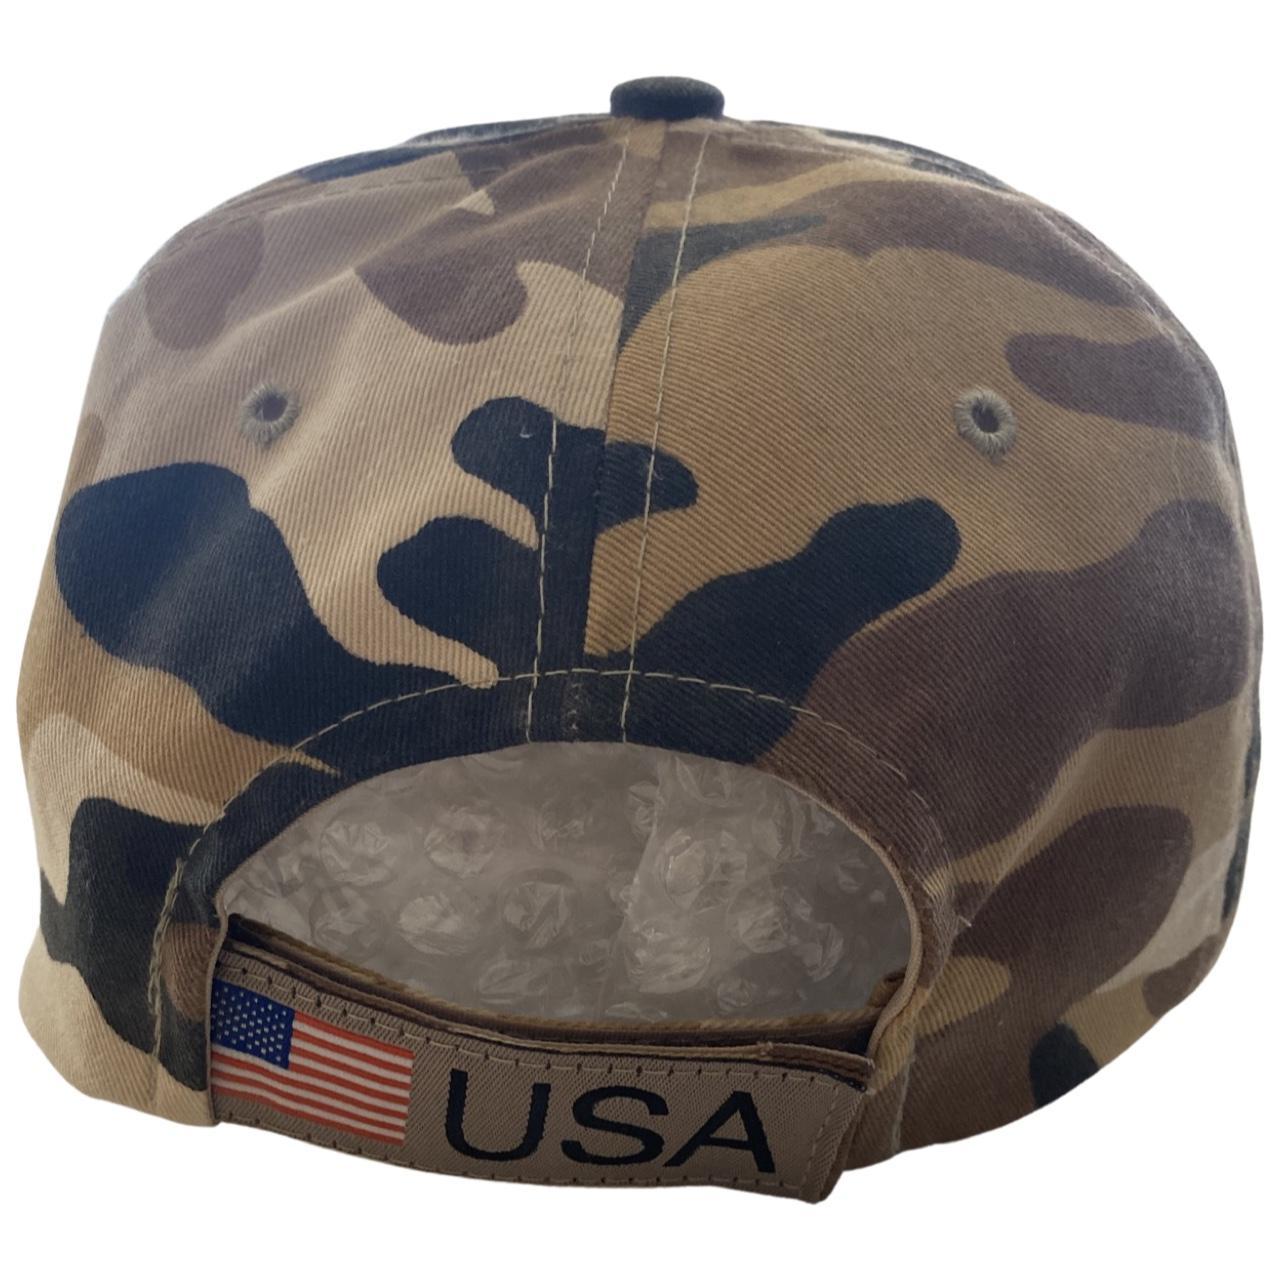 Product Image 2 - This is a desert Camouflage